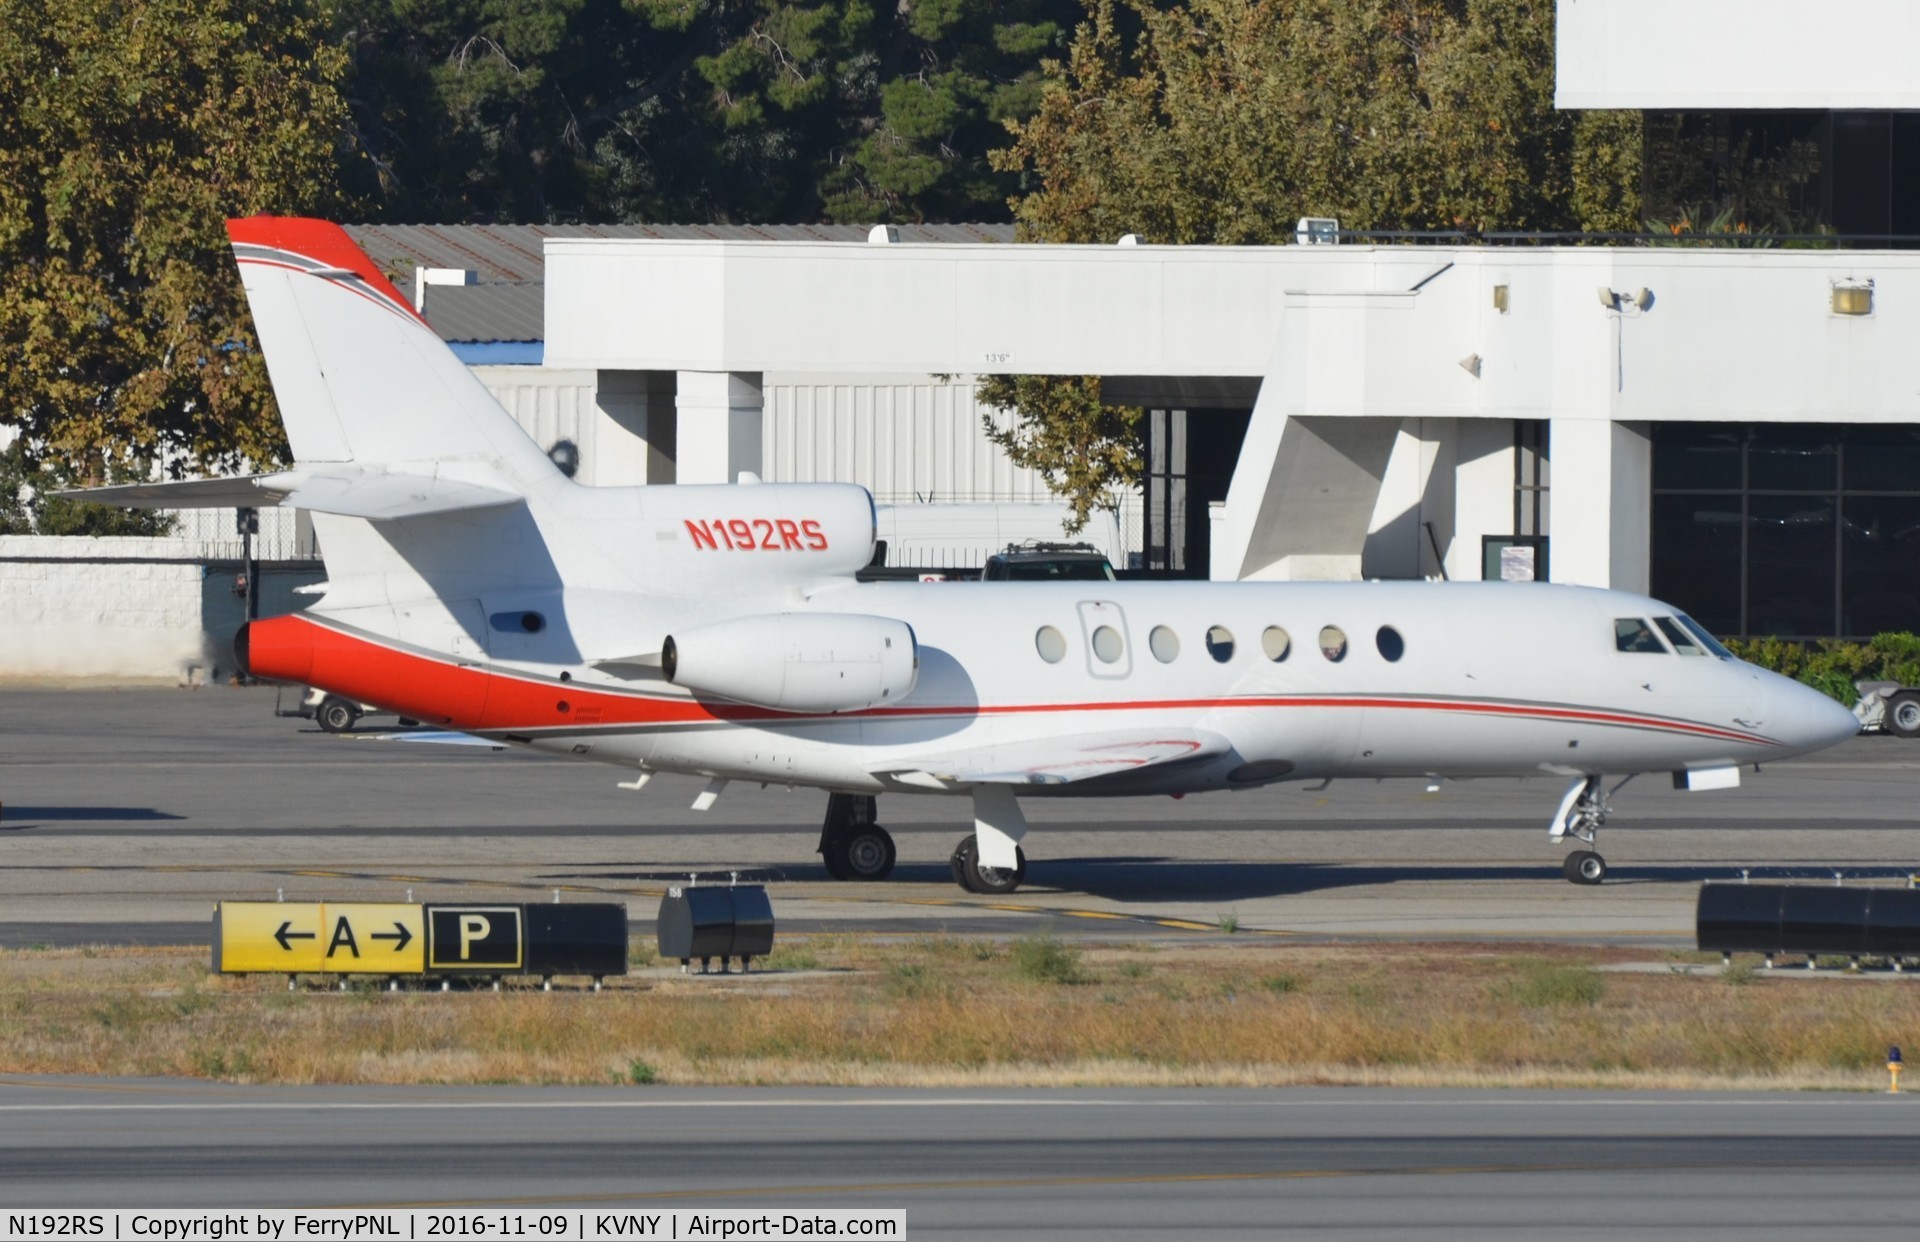 N192RS, 1990 Dassault Falcon 50 C/N 207, Falcon 50 taxying for departure.